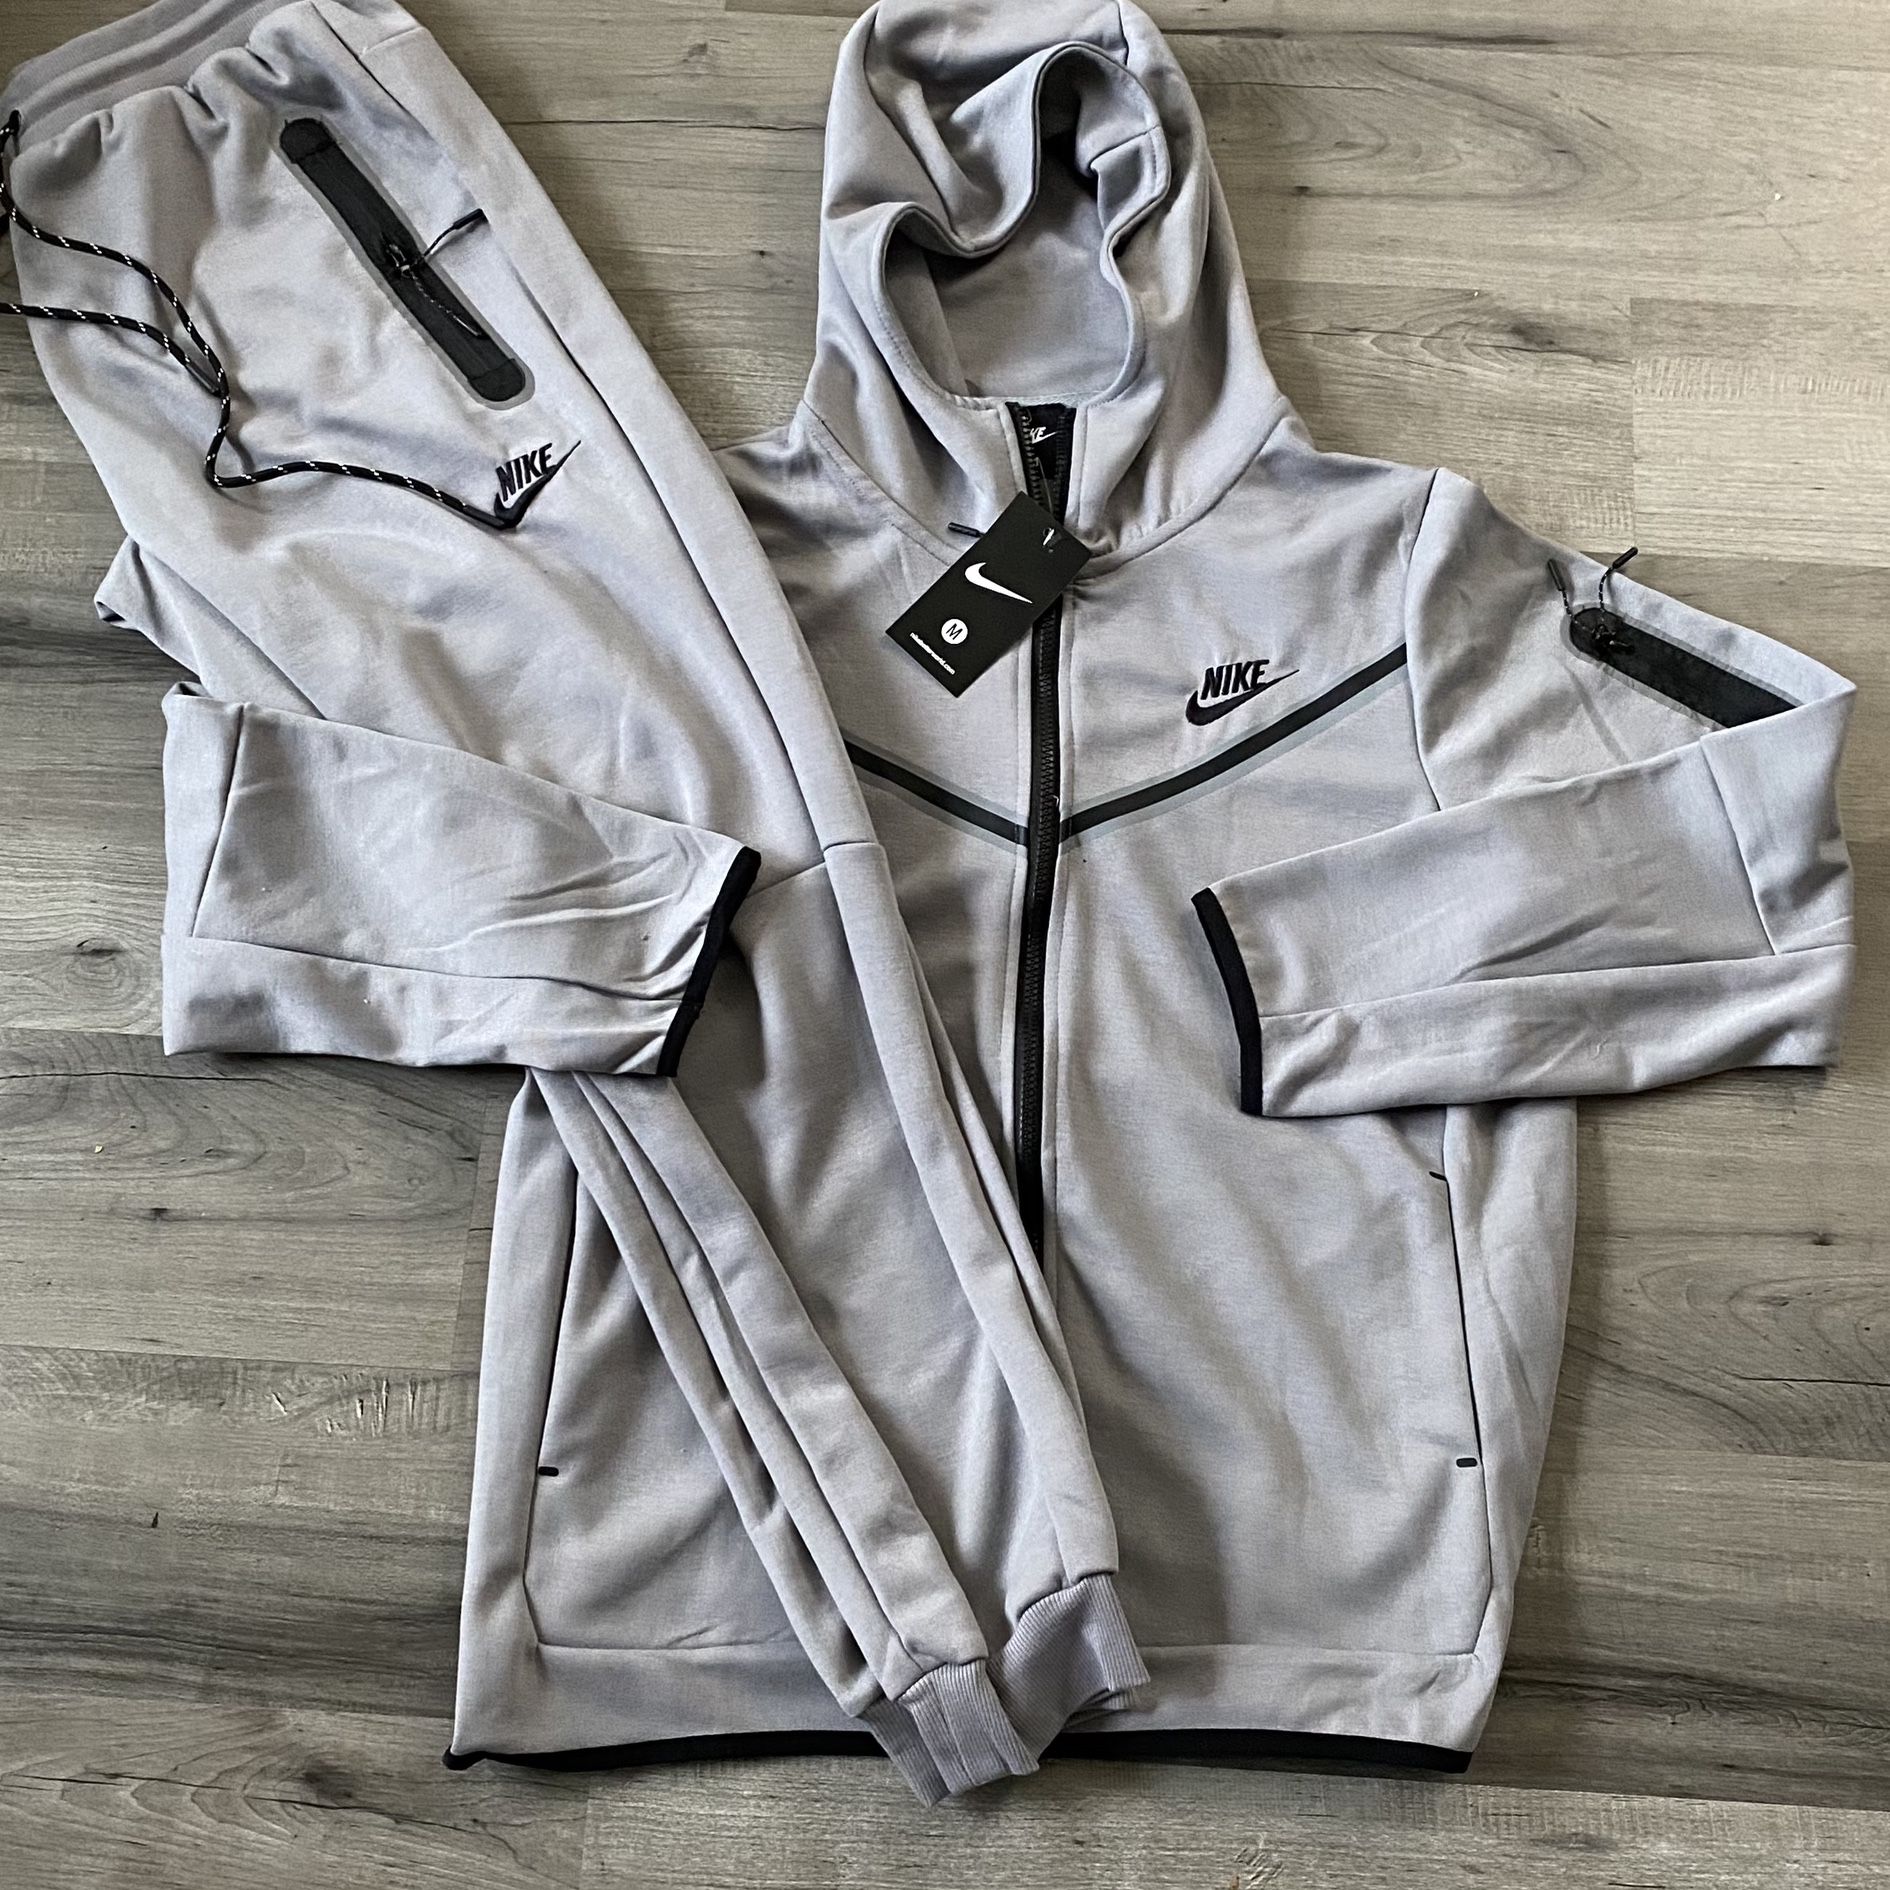 Men’s Nike outfits 